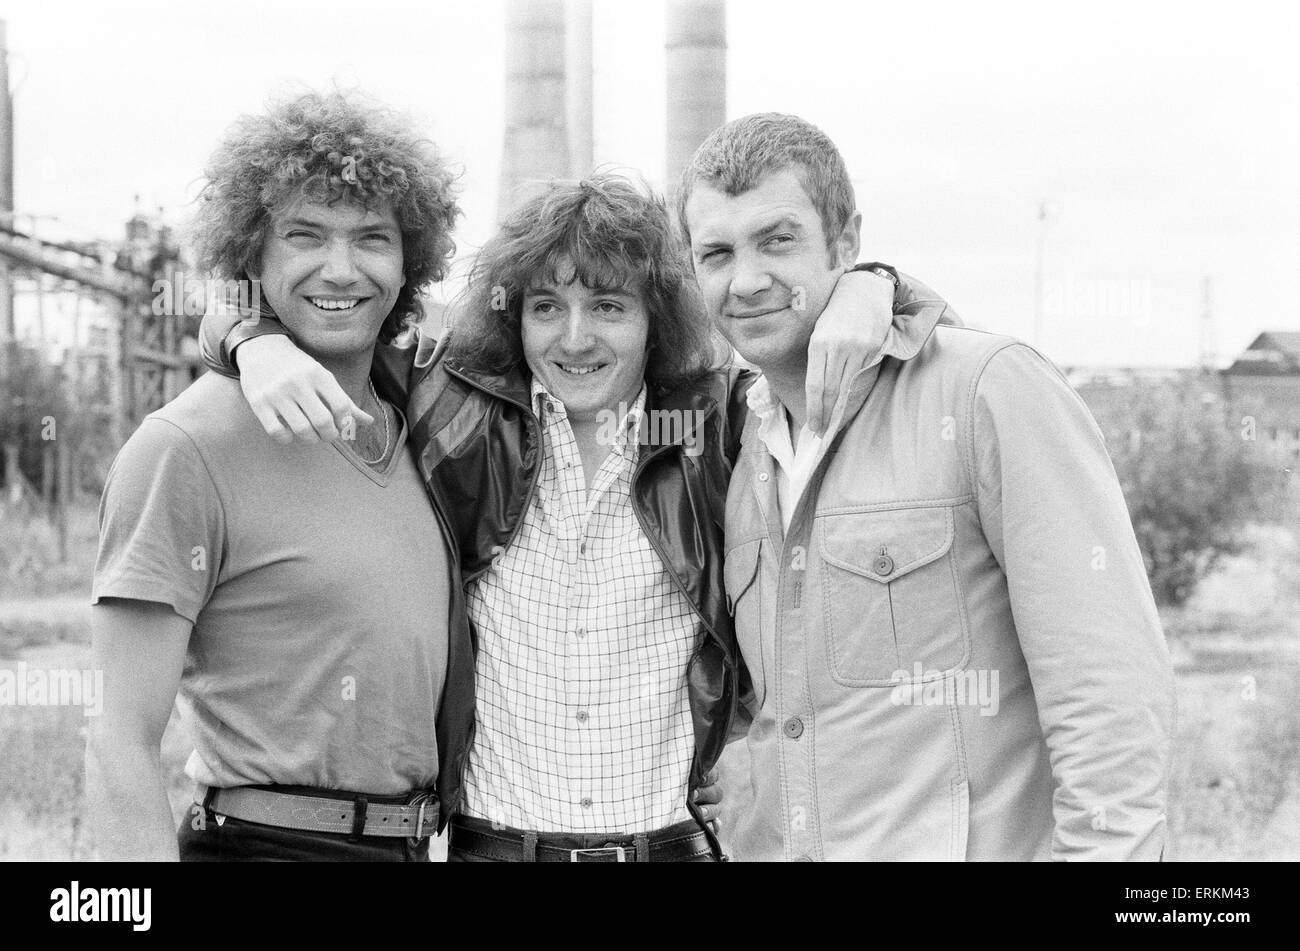 Stephen Lister 18 year old script writer, meets the stars of The Professionals, Martin Shaw and Lewis Collins, 16th August 1979. Stephen submitted a script, which was accepted, and is the idea for this particular episode called, The Purge of CI5. Stock Photo